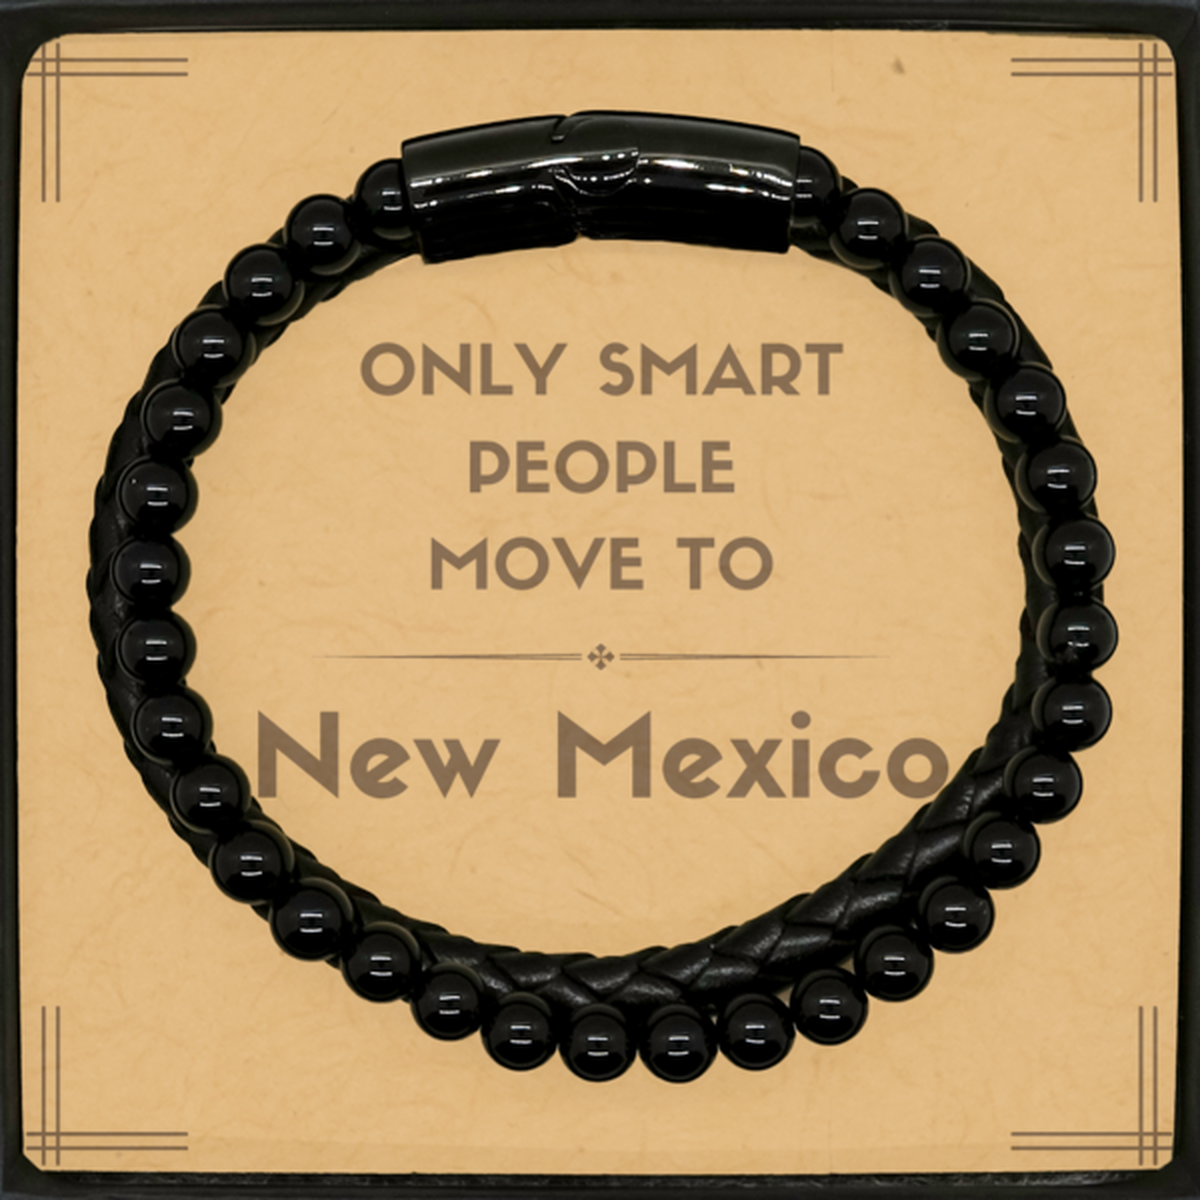 Only smart people move to New Mexico Stone Leather Bracelets, Message Card Gifts For New Mexico, Move to New Mexico Gifts for Friends Coworker Funny Saying Quote